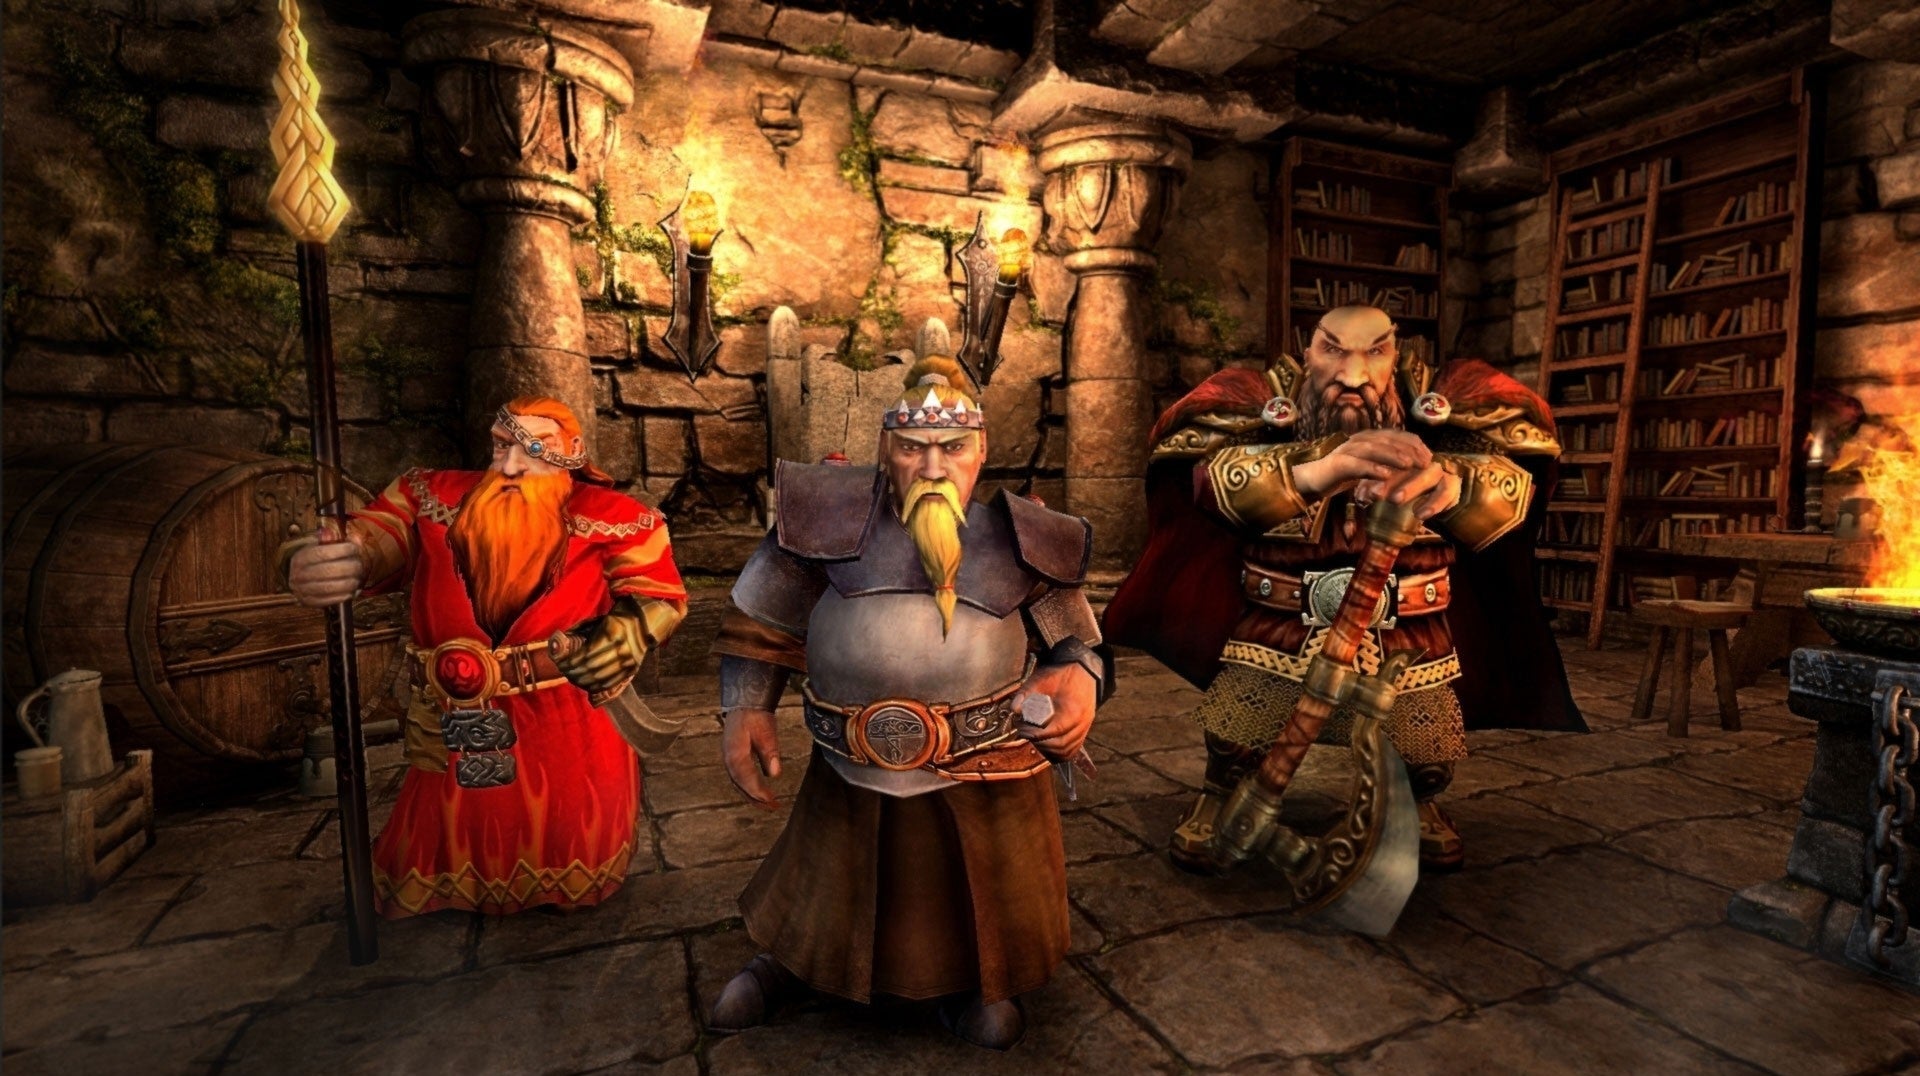 Image for Ubisoft pulls Might and Magic 10 - Legacy from sale after DRM server shutdown backlash